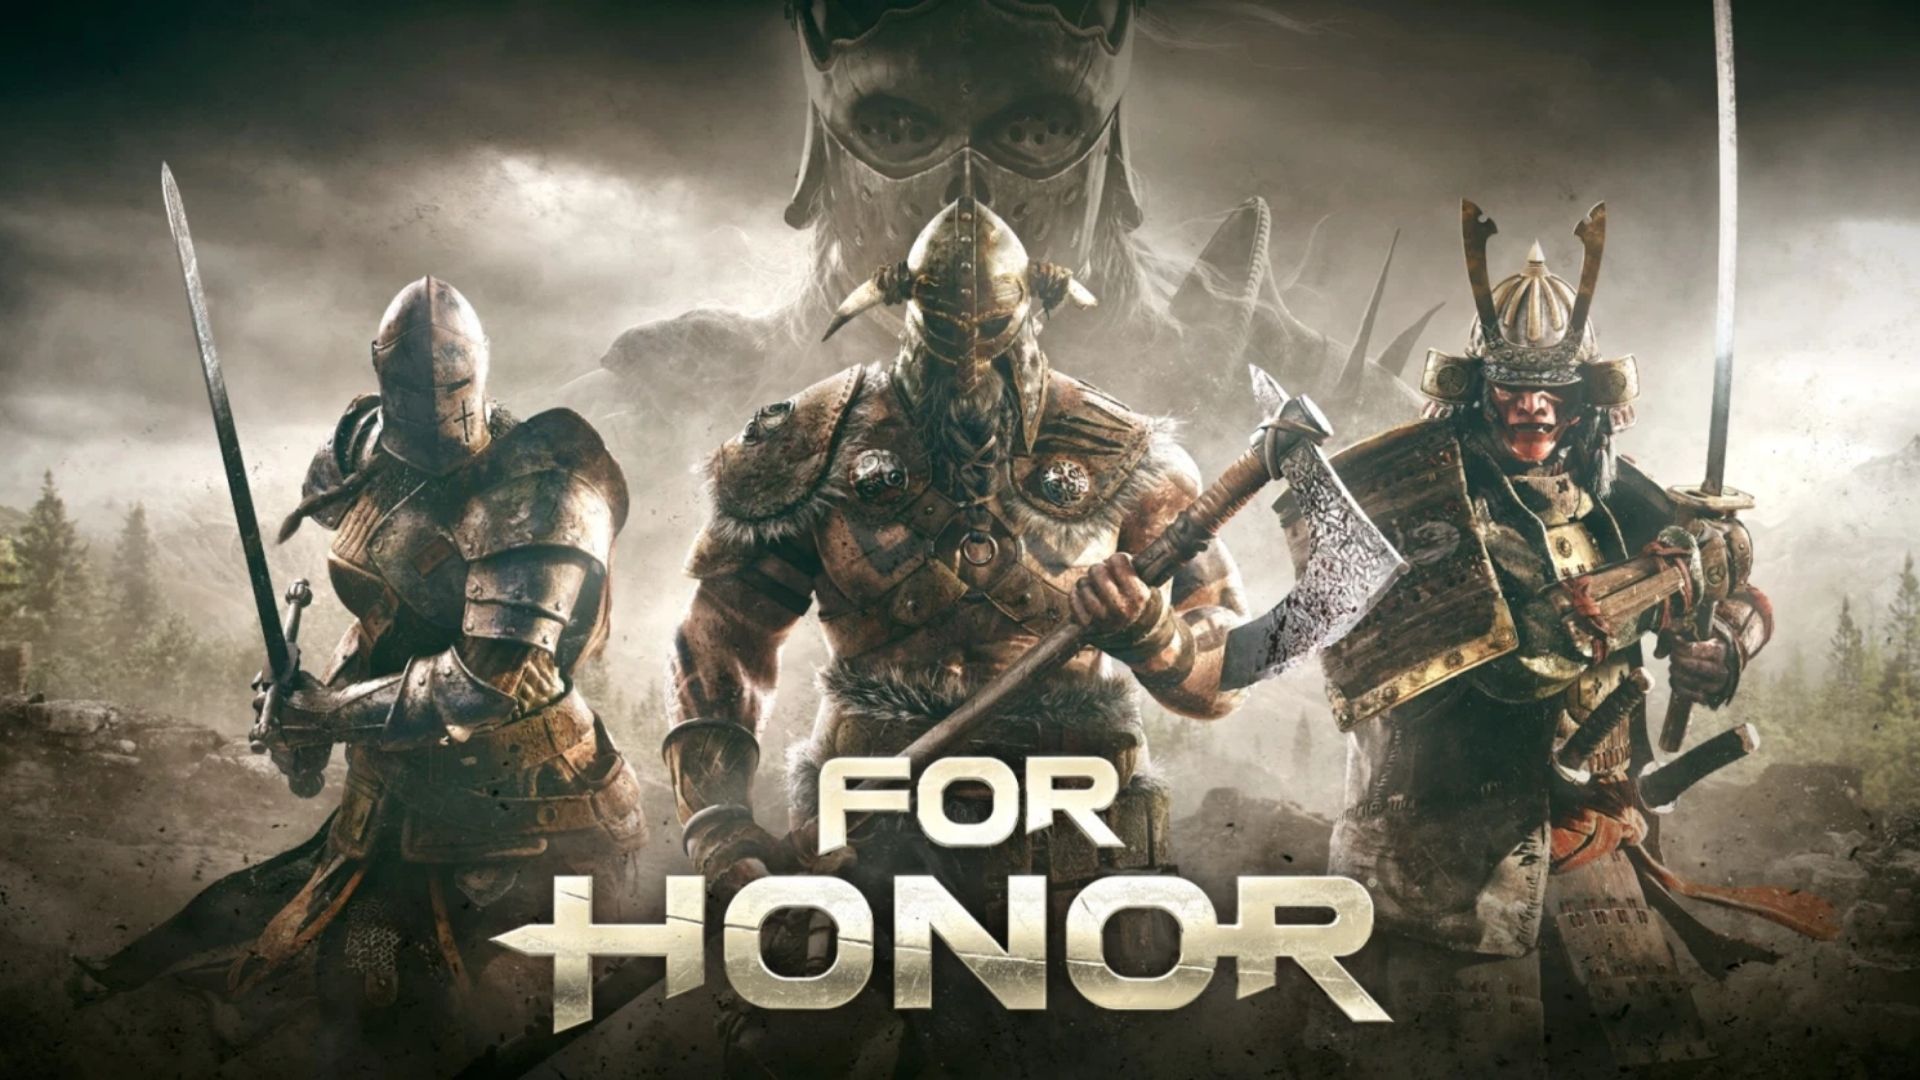 Xbox Game Pass adds For Honor and Darkest Dungeons to its gaming line-up. June is shaping up to be a great month for gaming.